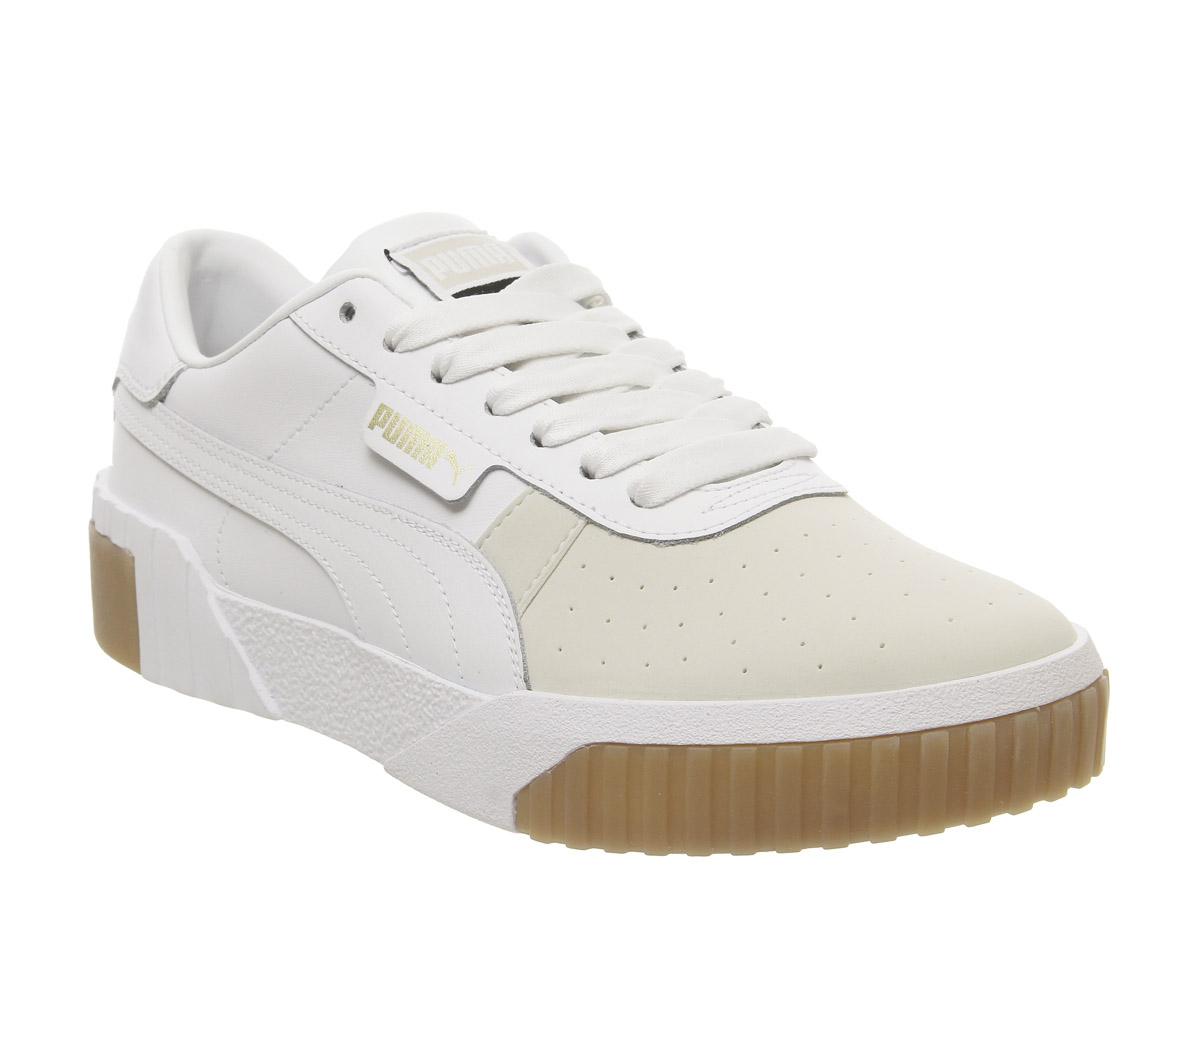 puma exotic cali trainers with gum sole in white